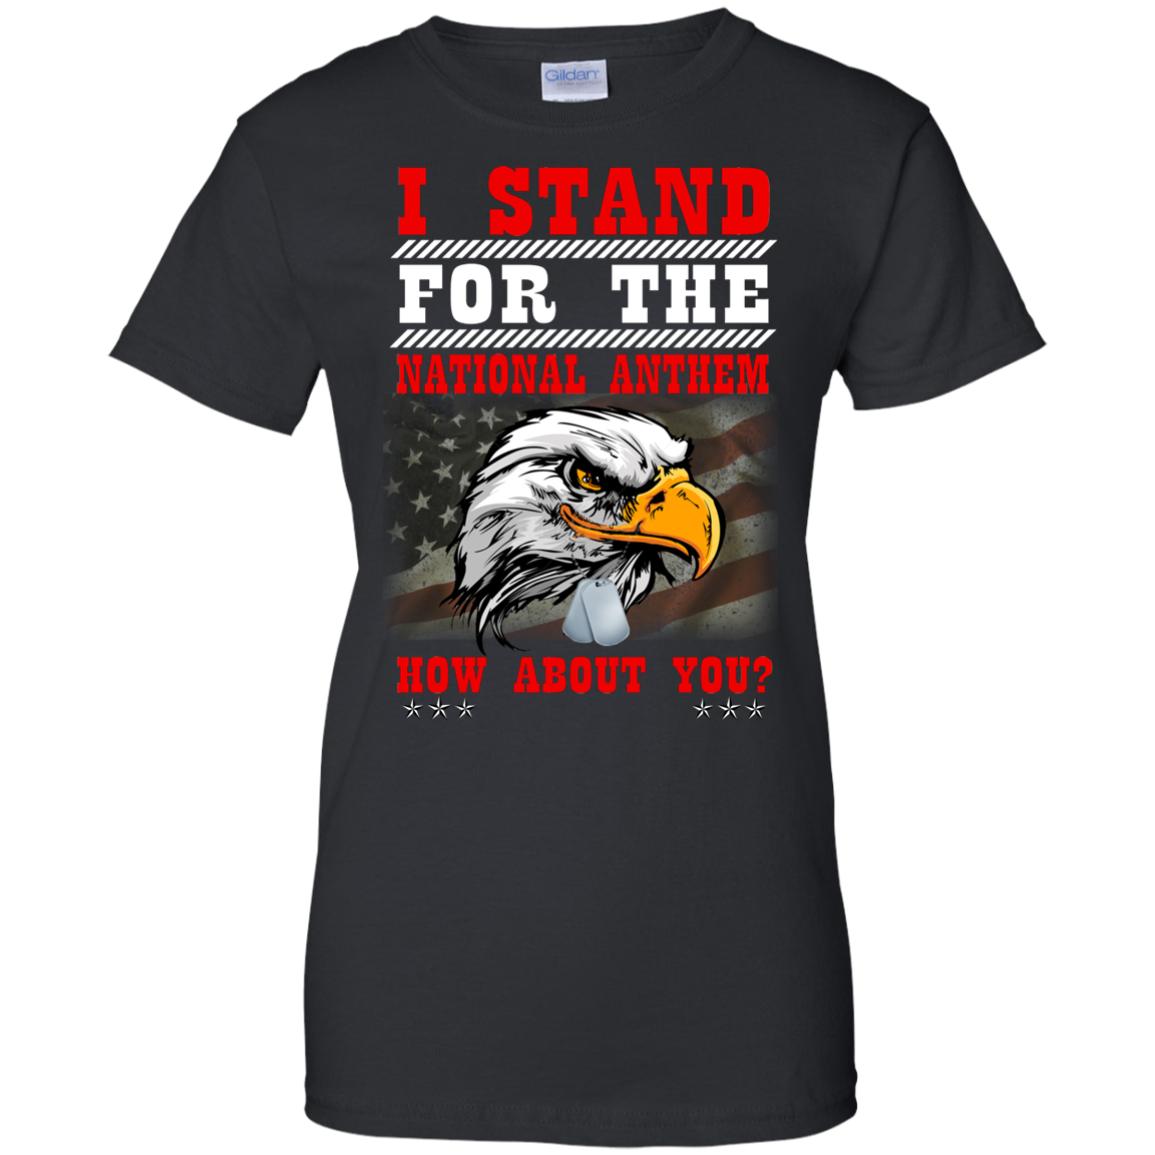 I Stand For The National Anthem - How About You Shirt | Allbluetees.com